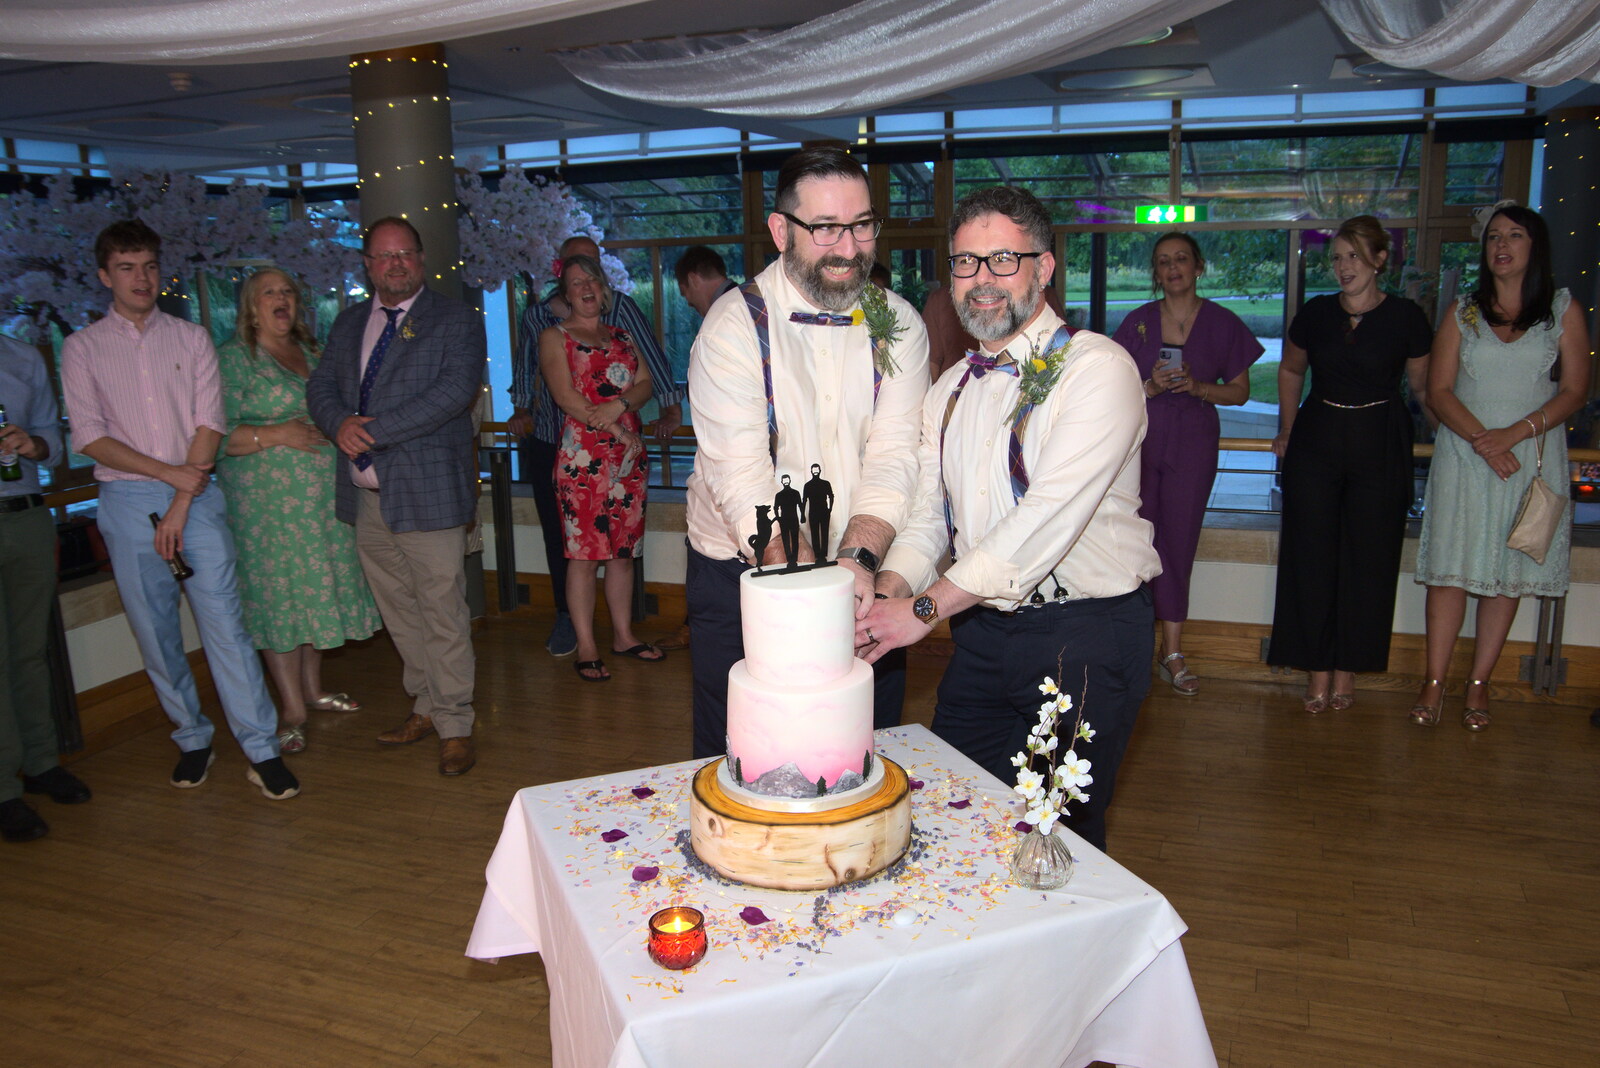 The cake is cut from Petay's Wedding Reception, Fanhams Hall, Ware, Hertfordshire - 20th August 2021